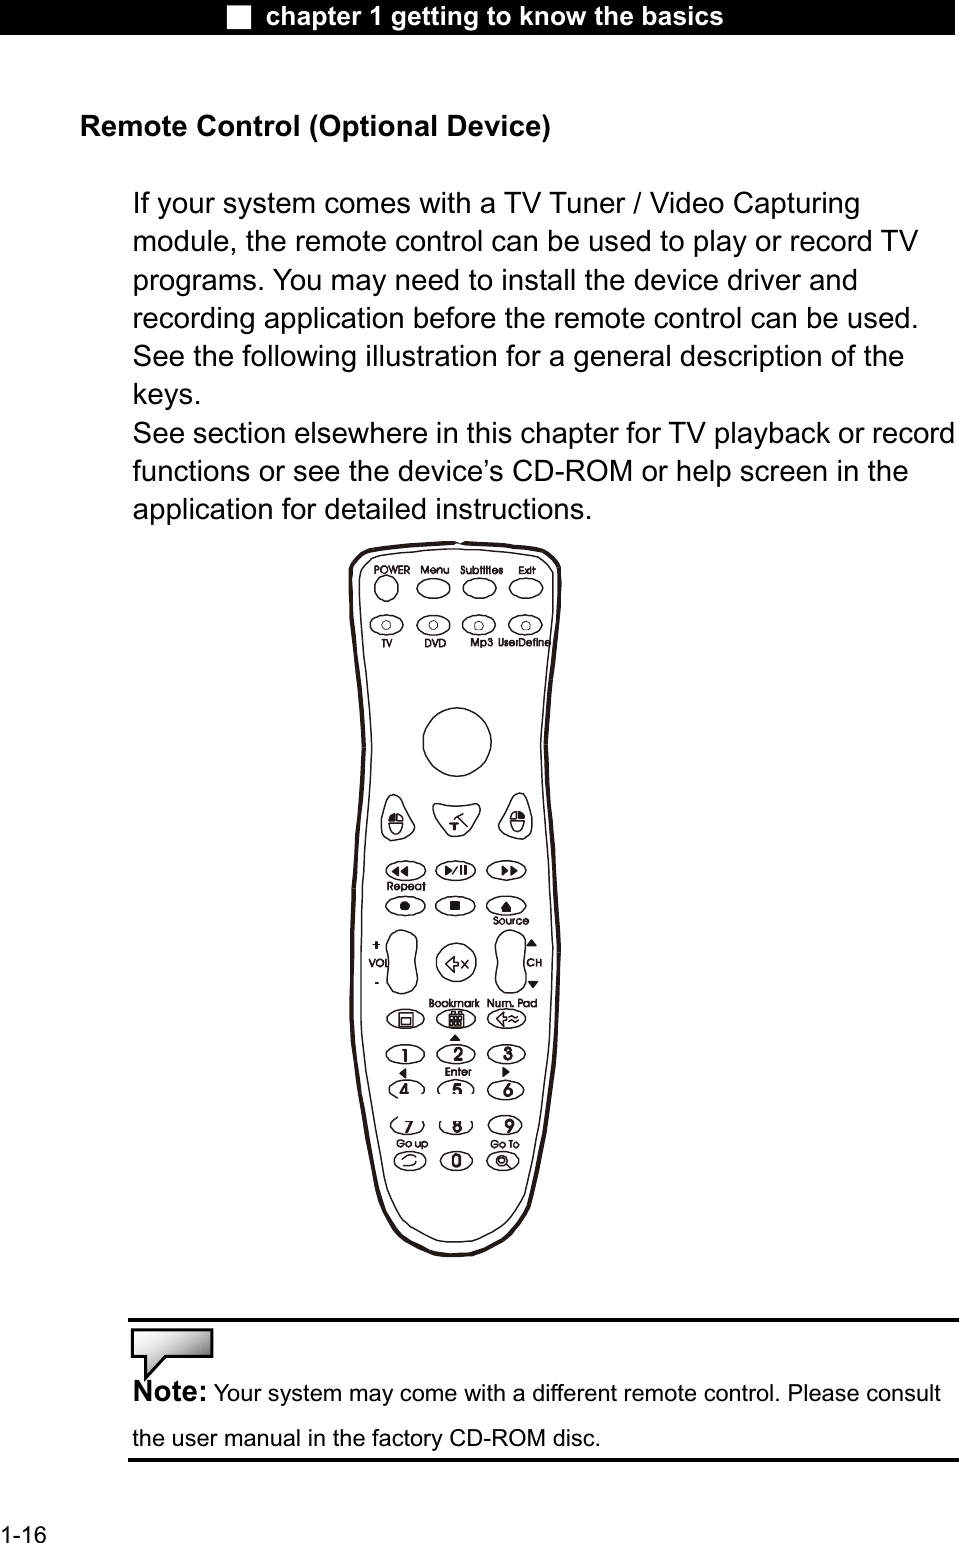 Ϯ chapter 1 getting to know the basicsRemote Control (Optional Device)If your system comes with a TV Tuner / Video Capturingmodule, the remote control can be used to play or record TVprograms. You may need to install the device driver andrecording application before the remote control can be used.See the following illustration for a general description of the keys.See section elsewhere in this chapter for TV playback or recordfunctions or see the device’s CD-ROM or help screen in the application for detailed instructions.Note: Your system may come with a different remote control. Please consult the user manual in the factory CD-ROM disc. 1-16